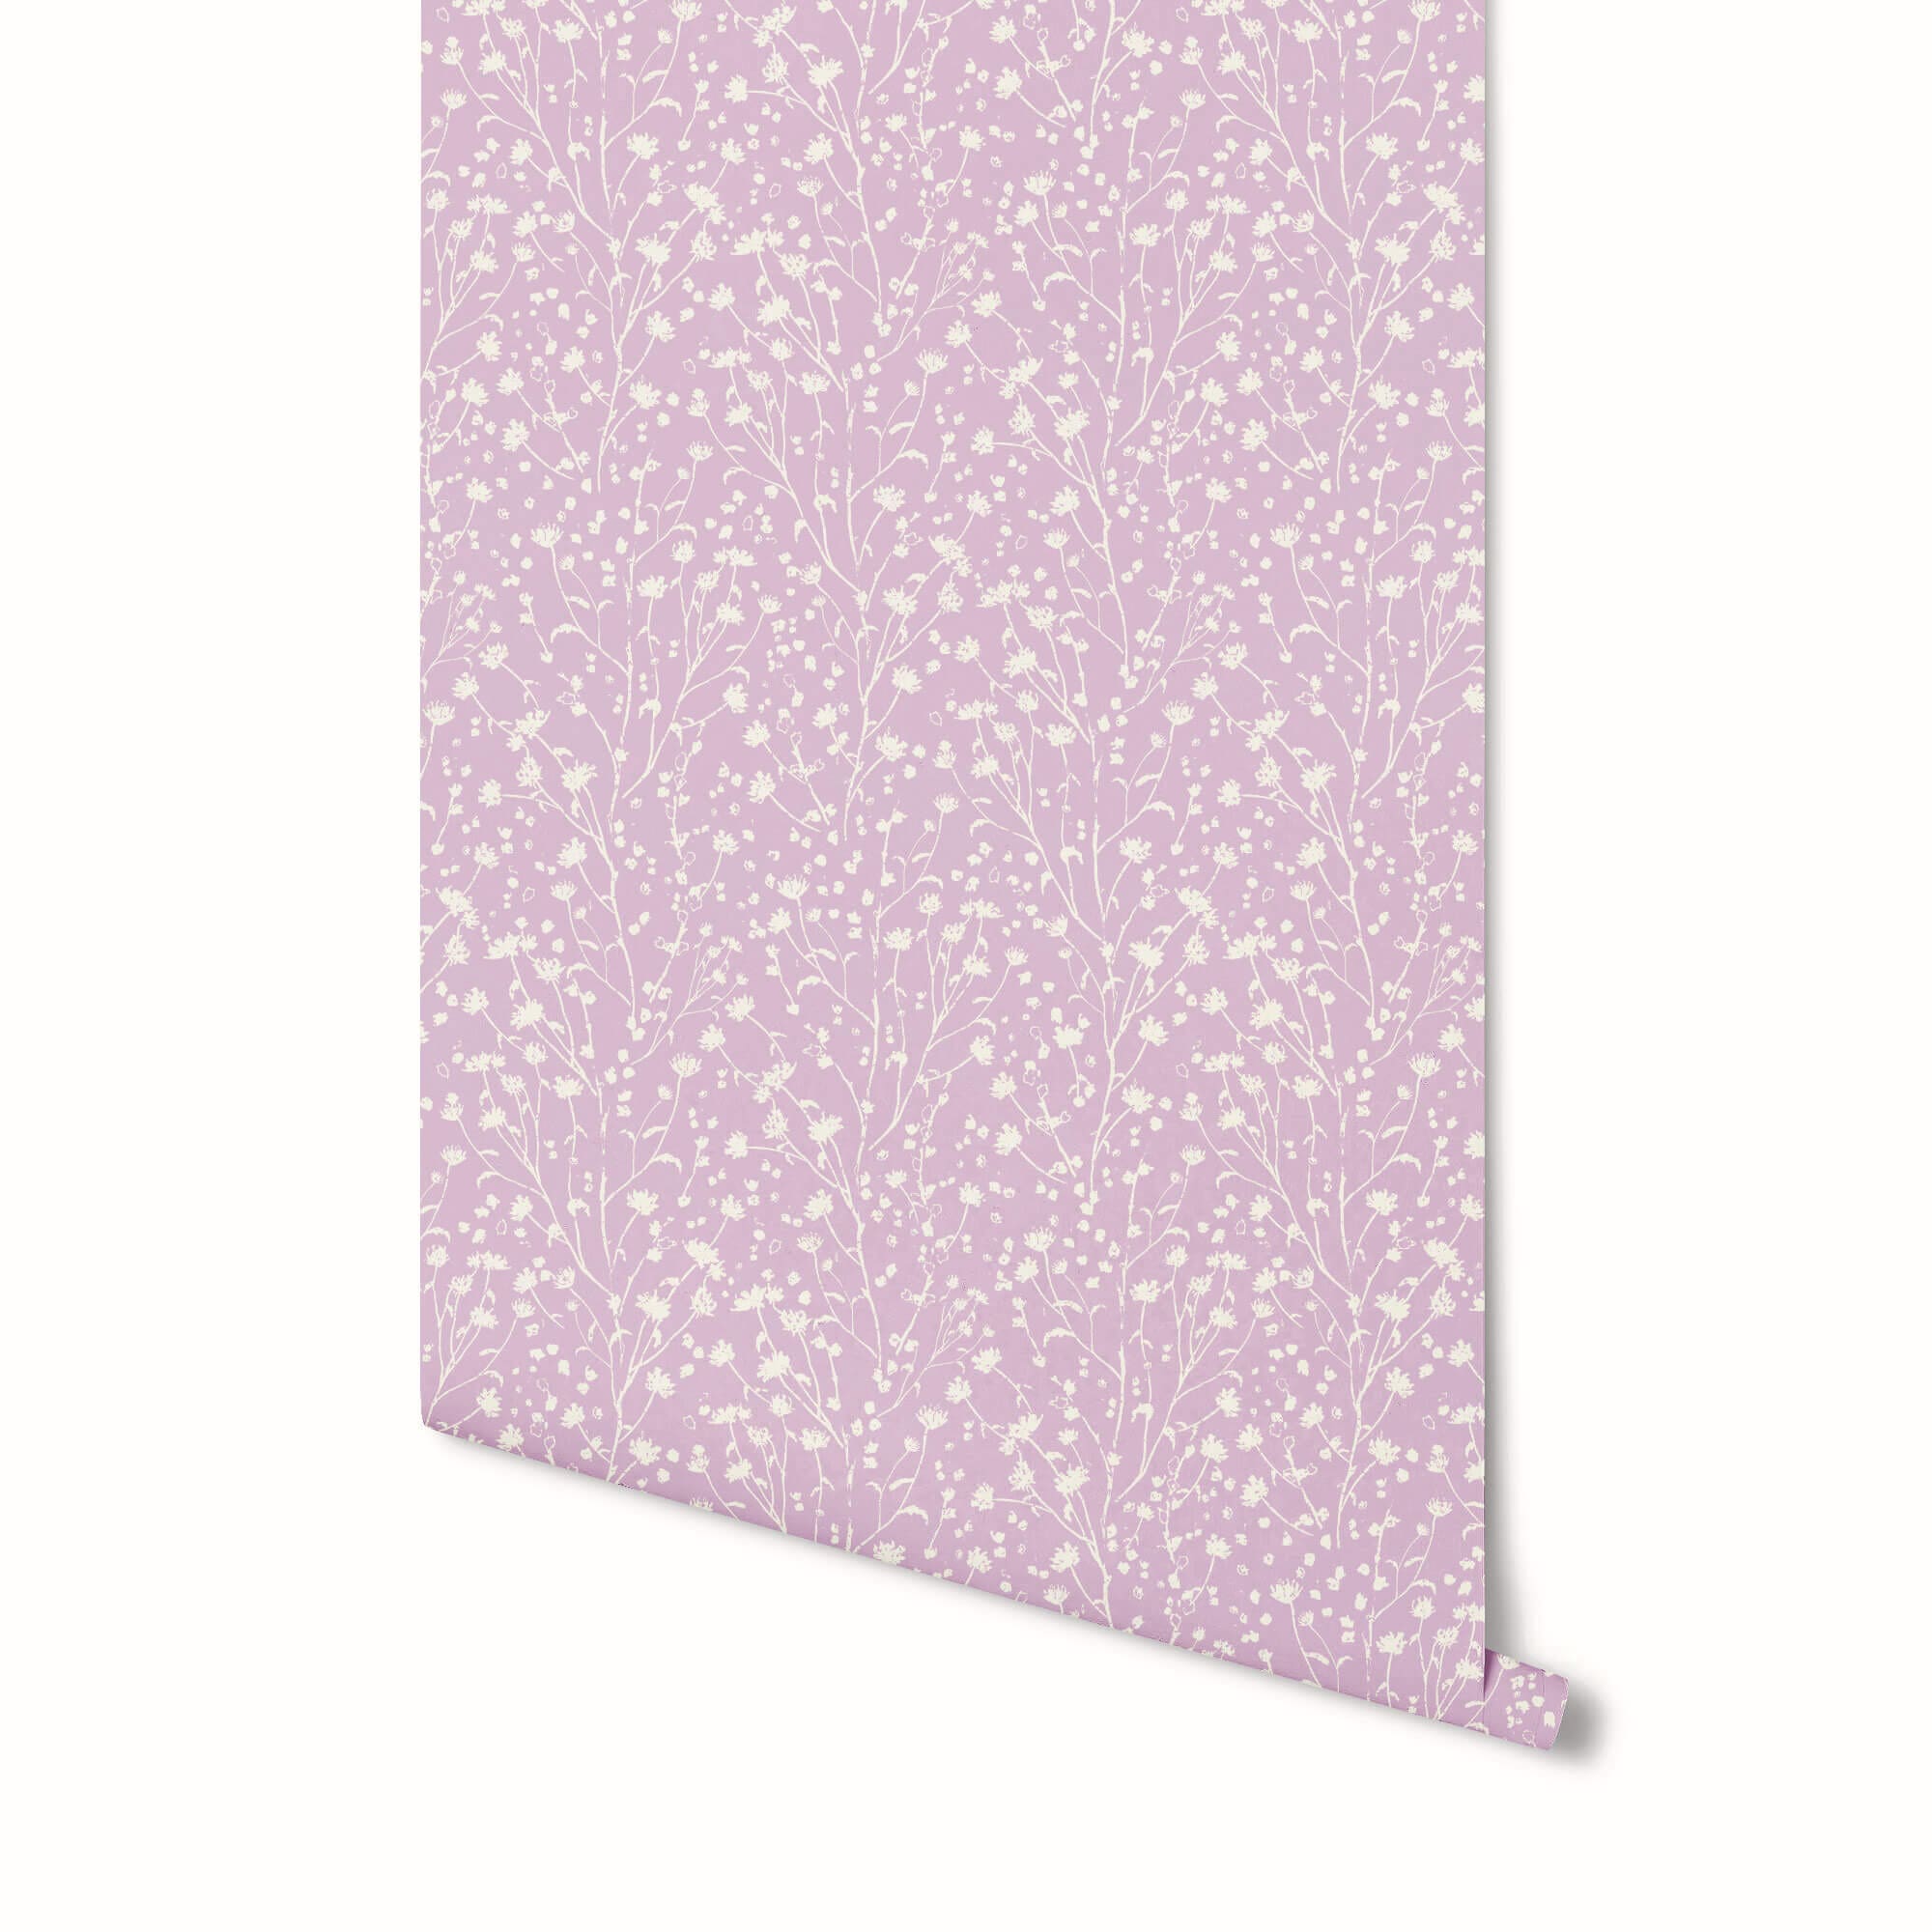 Blossoms Reverse Wallpaper in Lilac